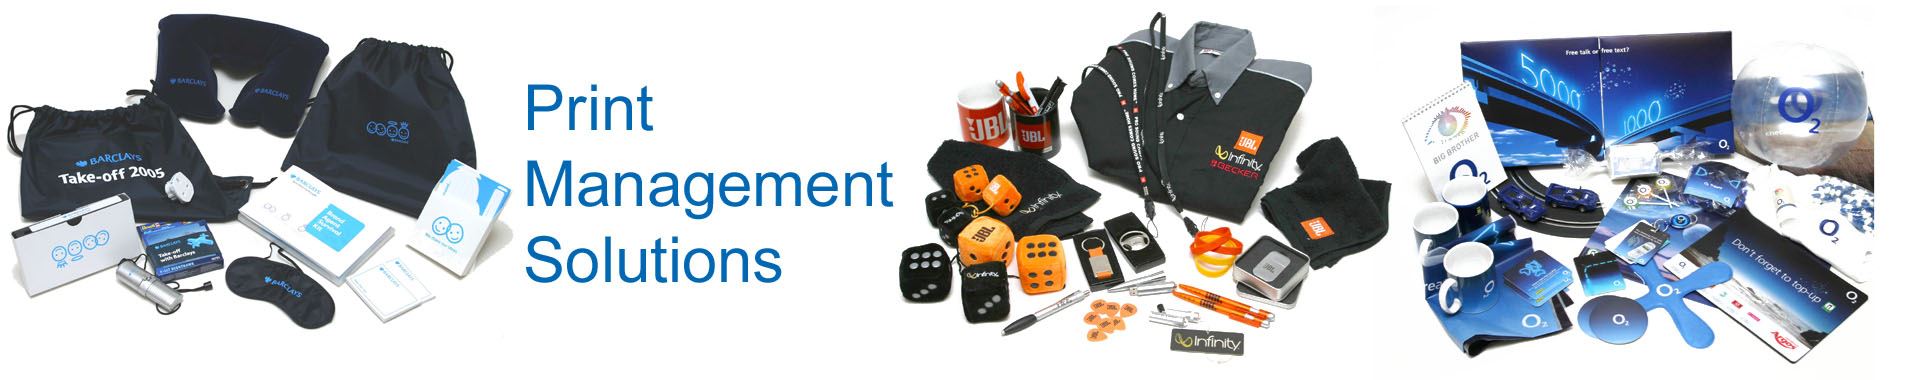 Print Management - Globally Sourced Promotional Products